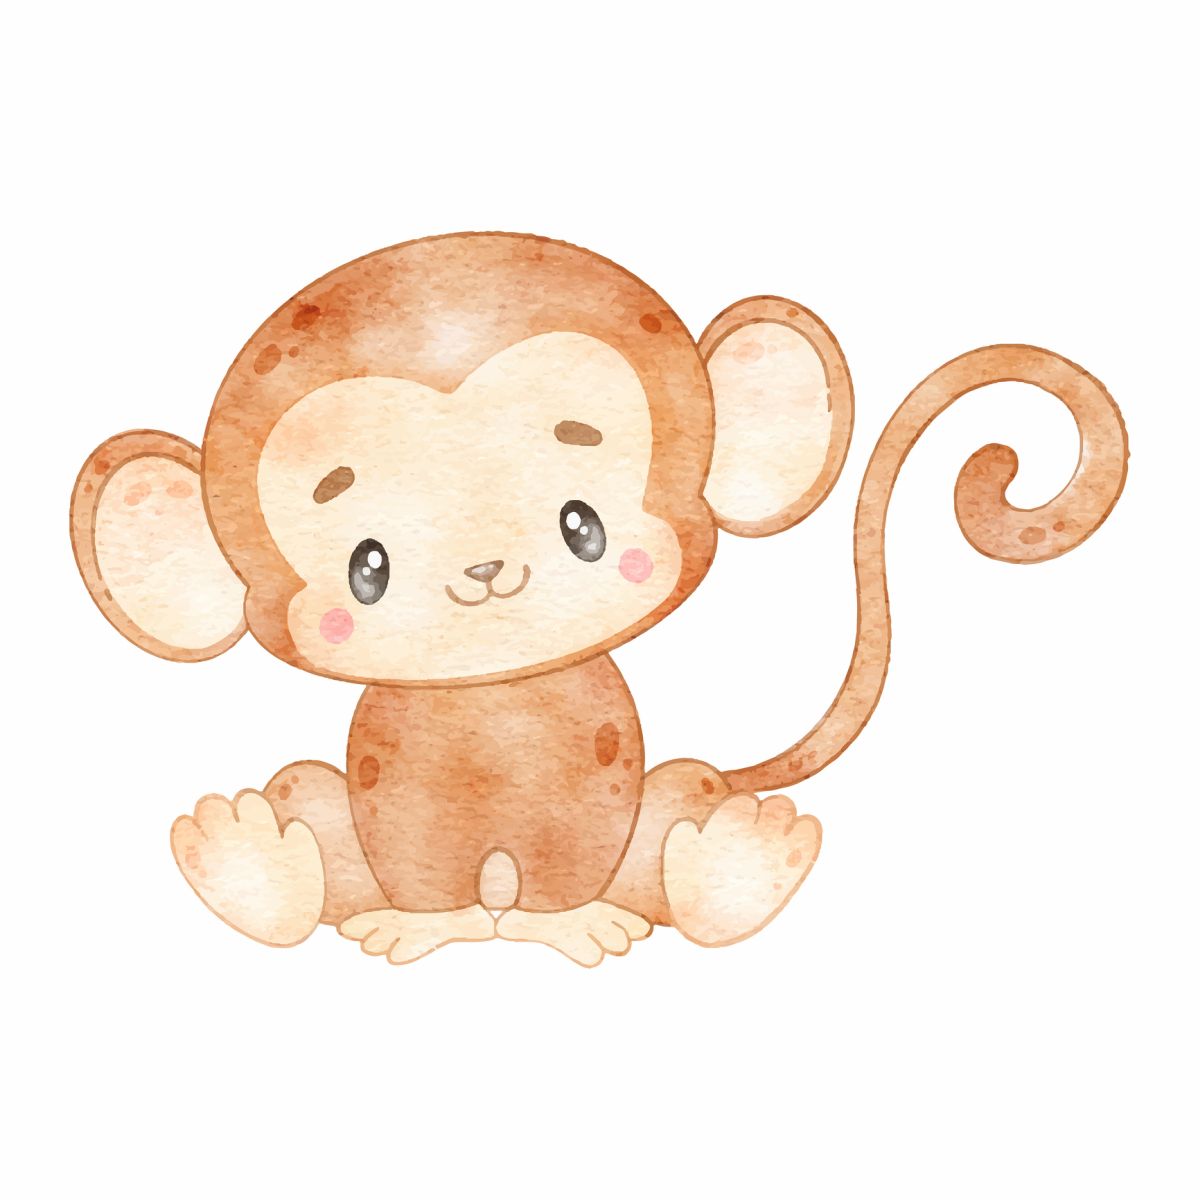 How To Draw a Monkey